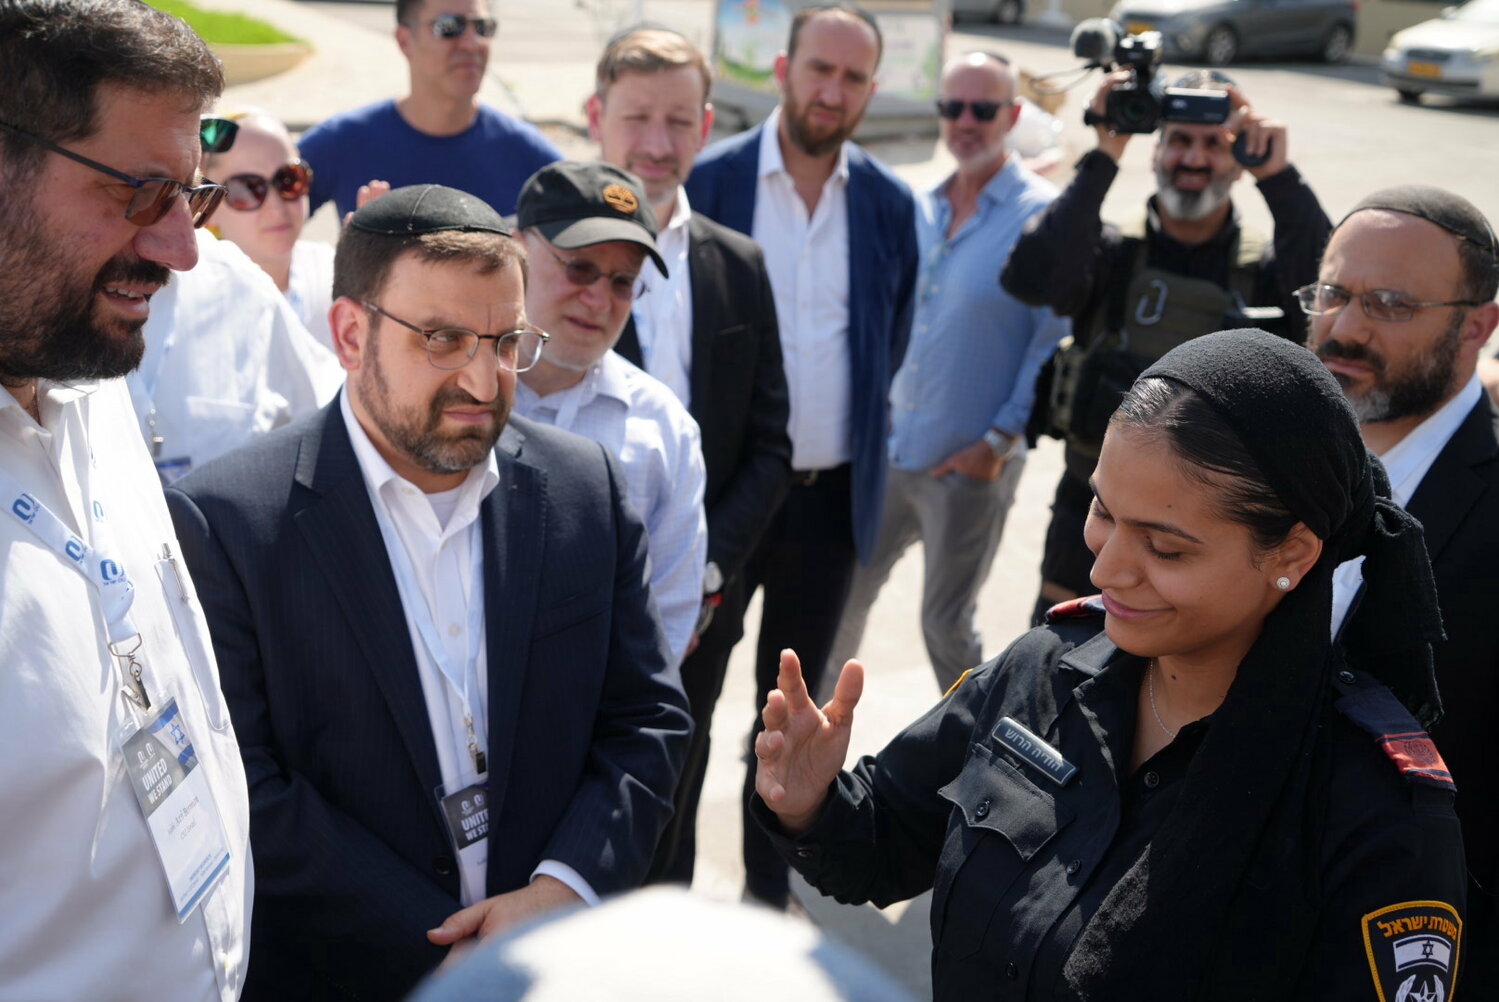 L-R: OU Israel Executive Director Rabbi Avi Berman, OU National Director of Community Engagement Rabbi Yaakov Glasser and other rabbis and lay leaders, hear from Israeli police officer Hodaya Harrush, who had returned for the first time to the Sderot police station where her late husband was one was one of the first police officers to fall in the heroic defense of Sderot.